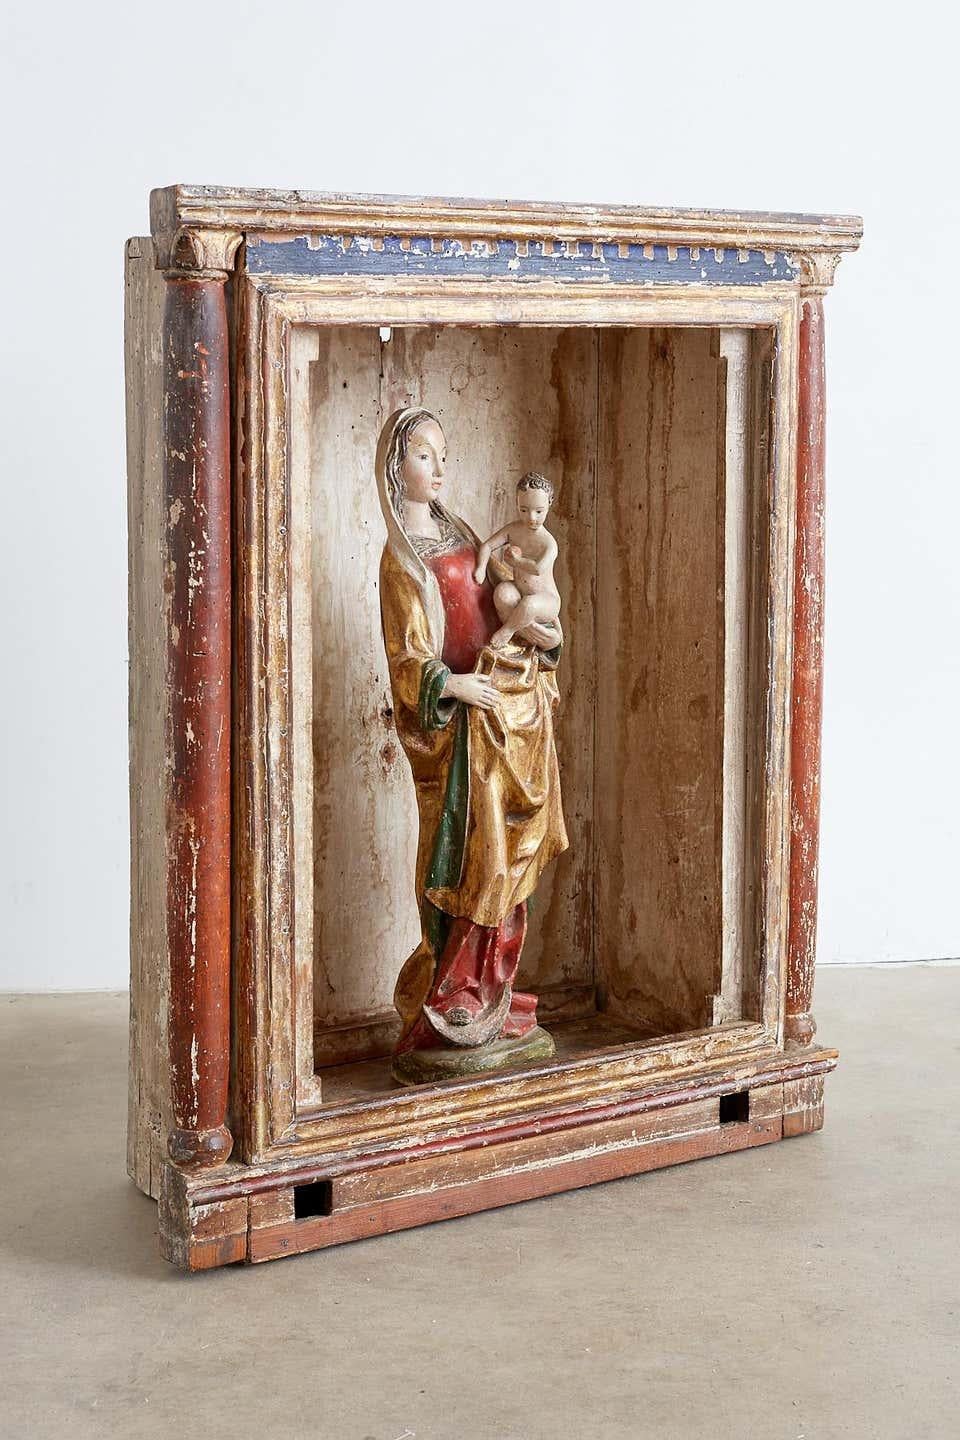 Extraordinary polychromed 16th century Madonna and child from a French monastery. Solid carved wooden Santos statue featuring gilded flowing robe and polychrome finish. The Madonna or Virgin Mary has an exceptionally beautiful face and rich patina.